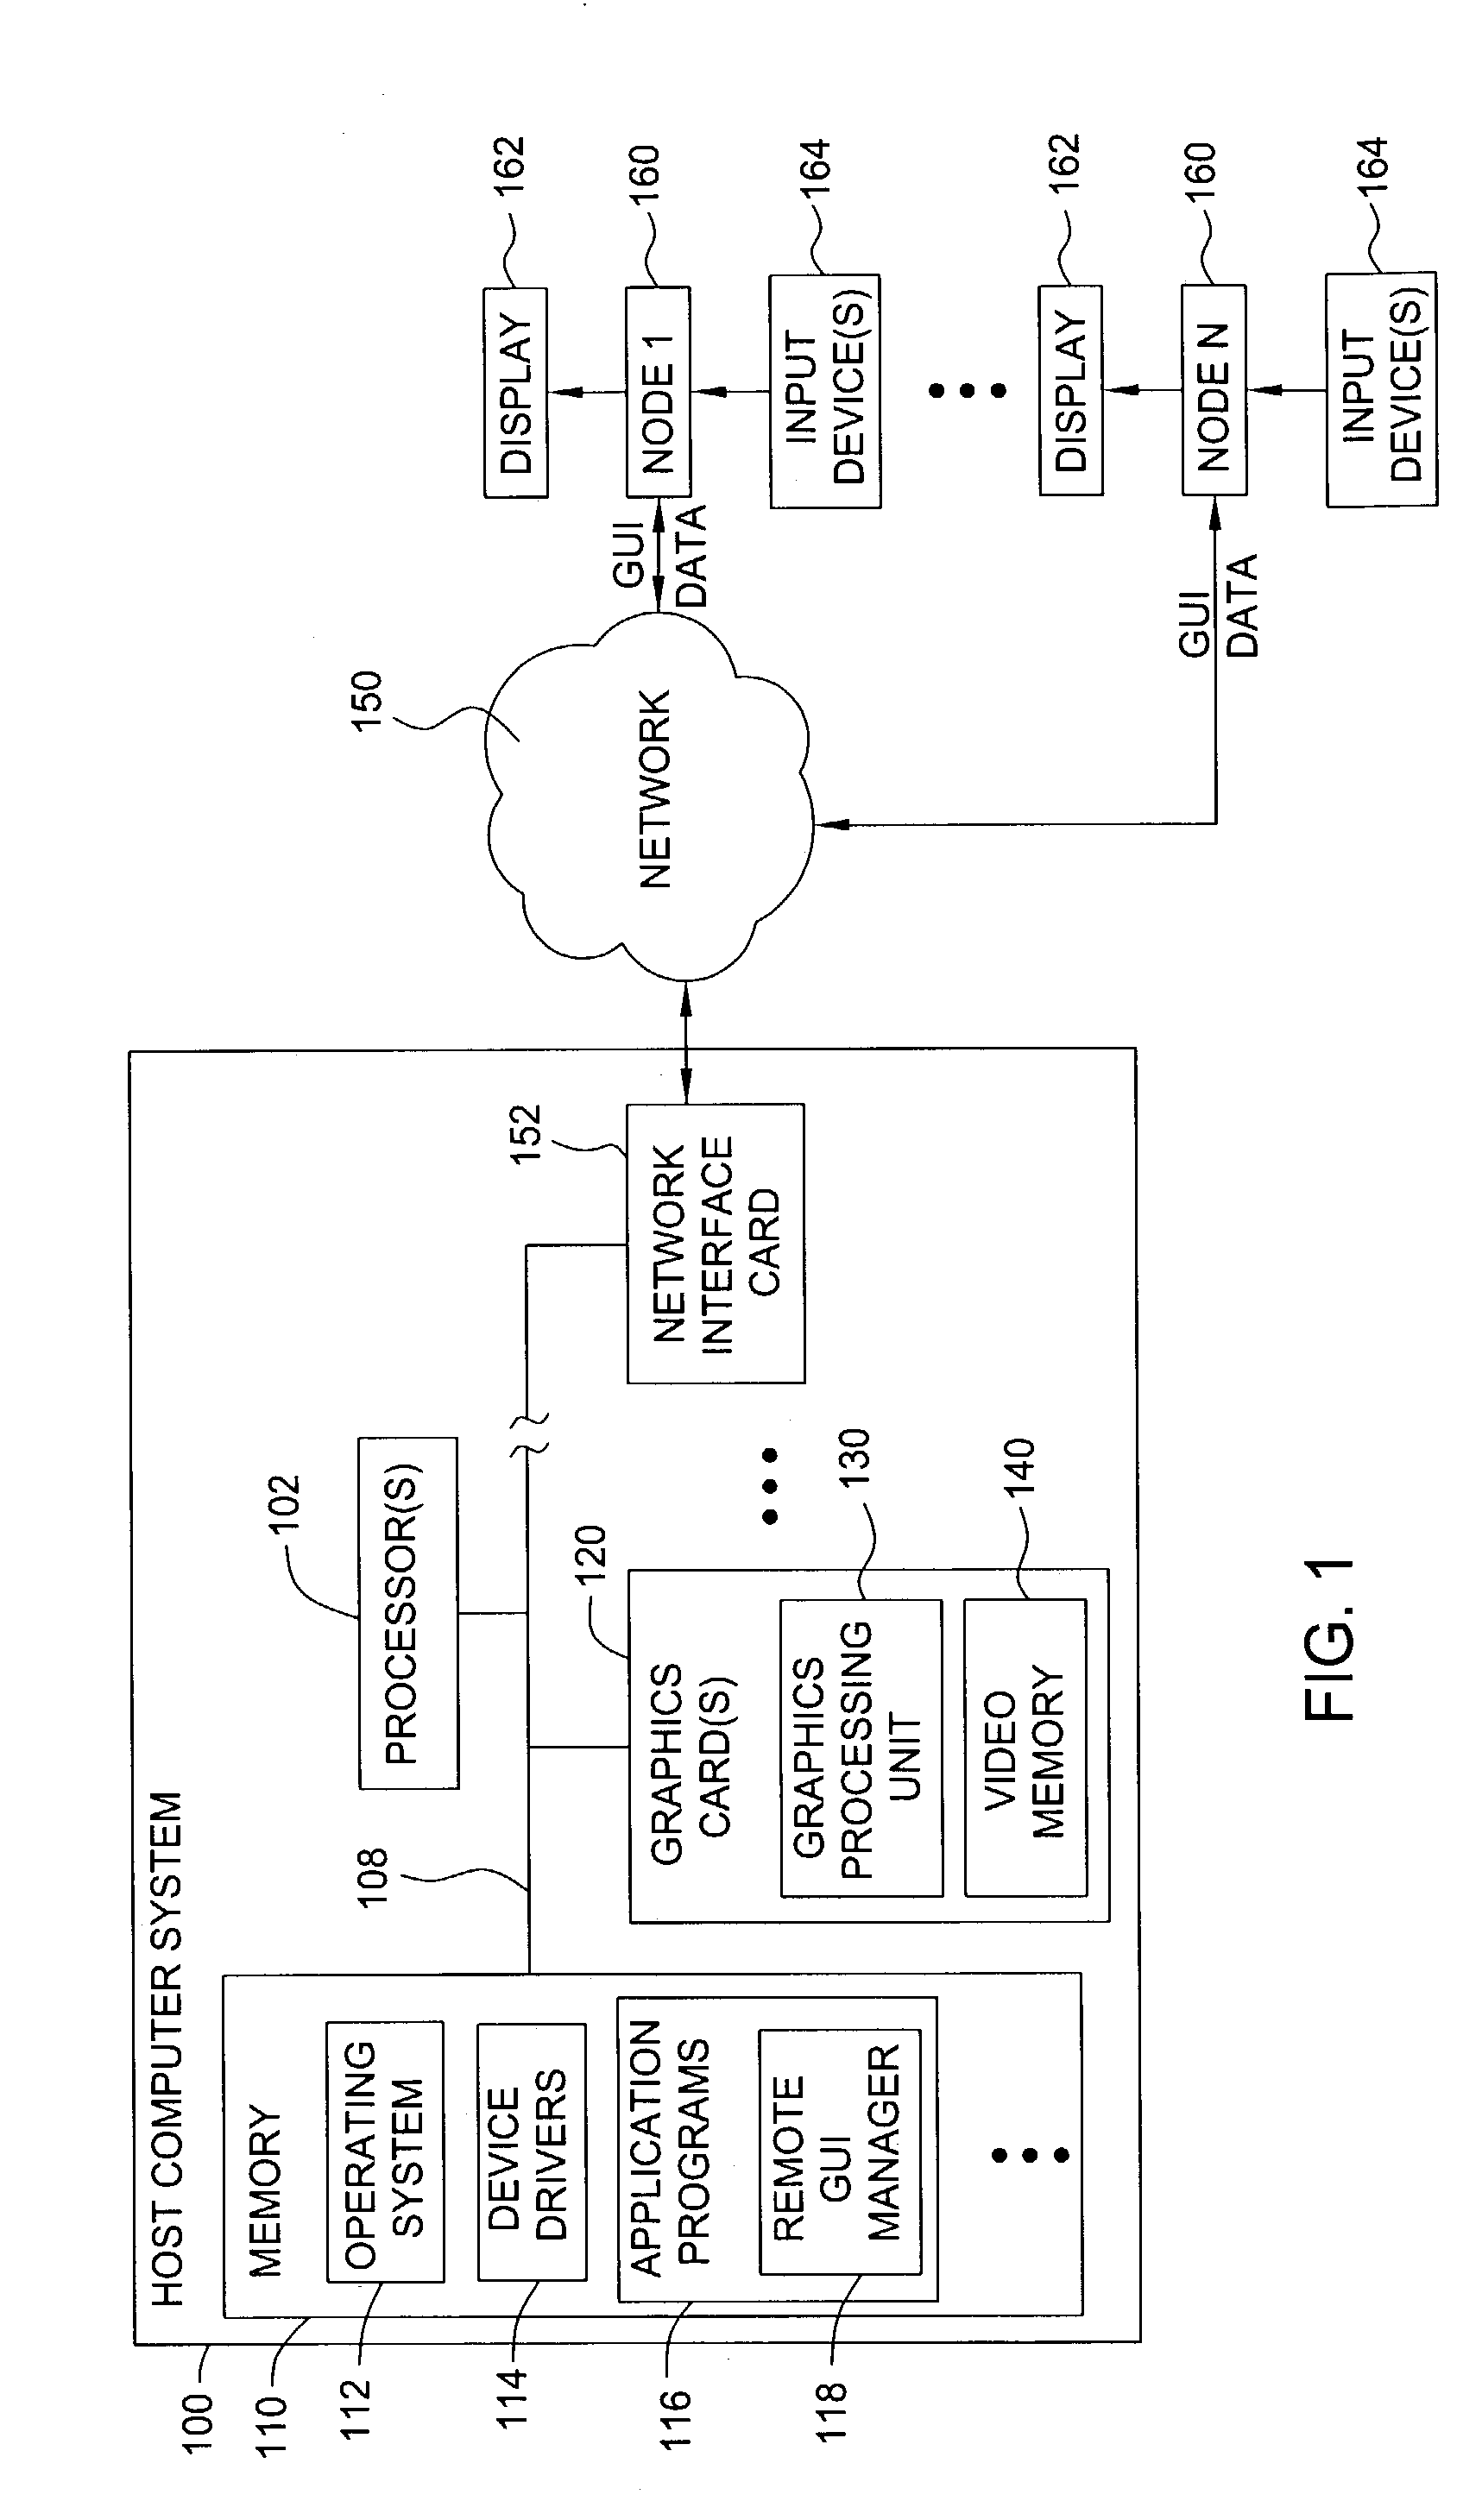 Remote graphical user interface support using a graphics processing unit